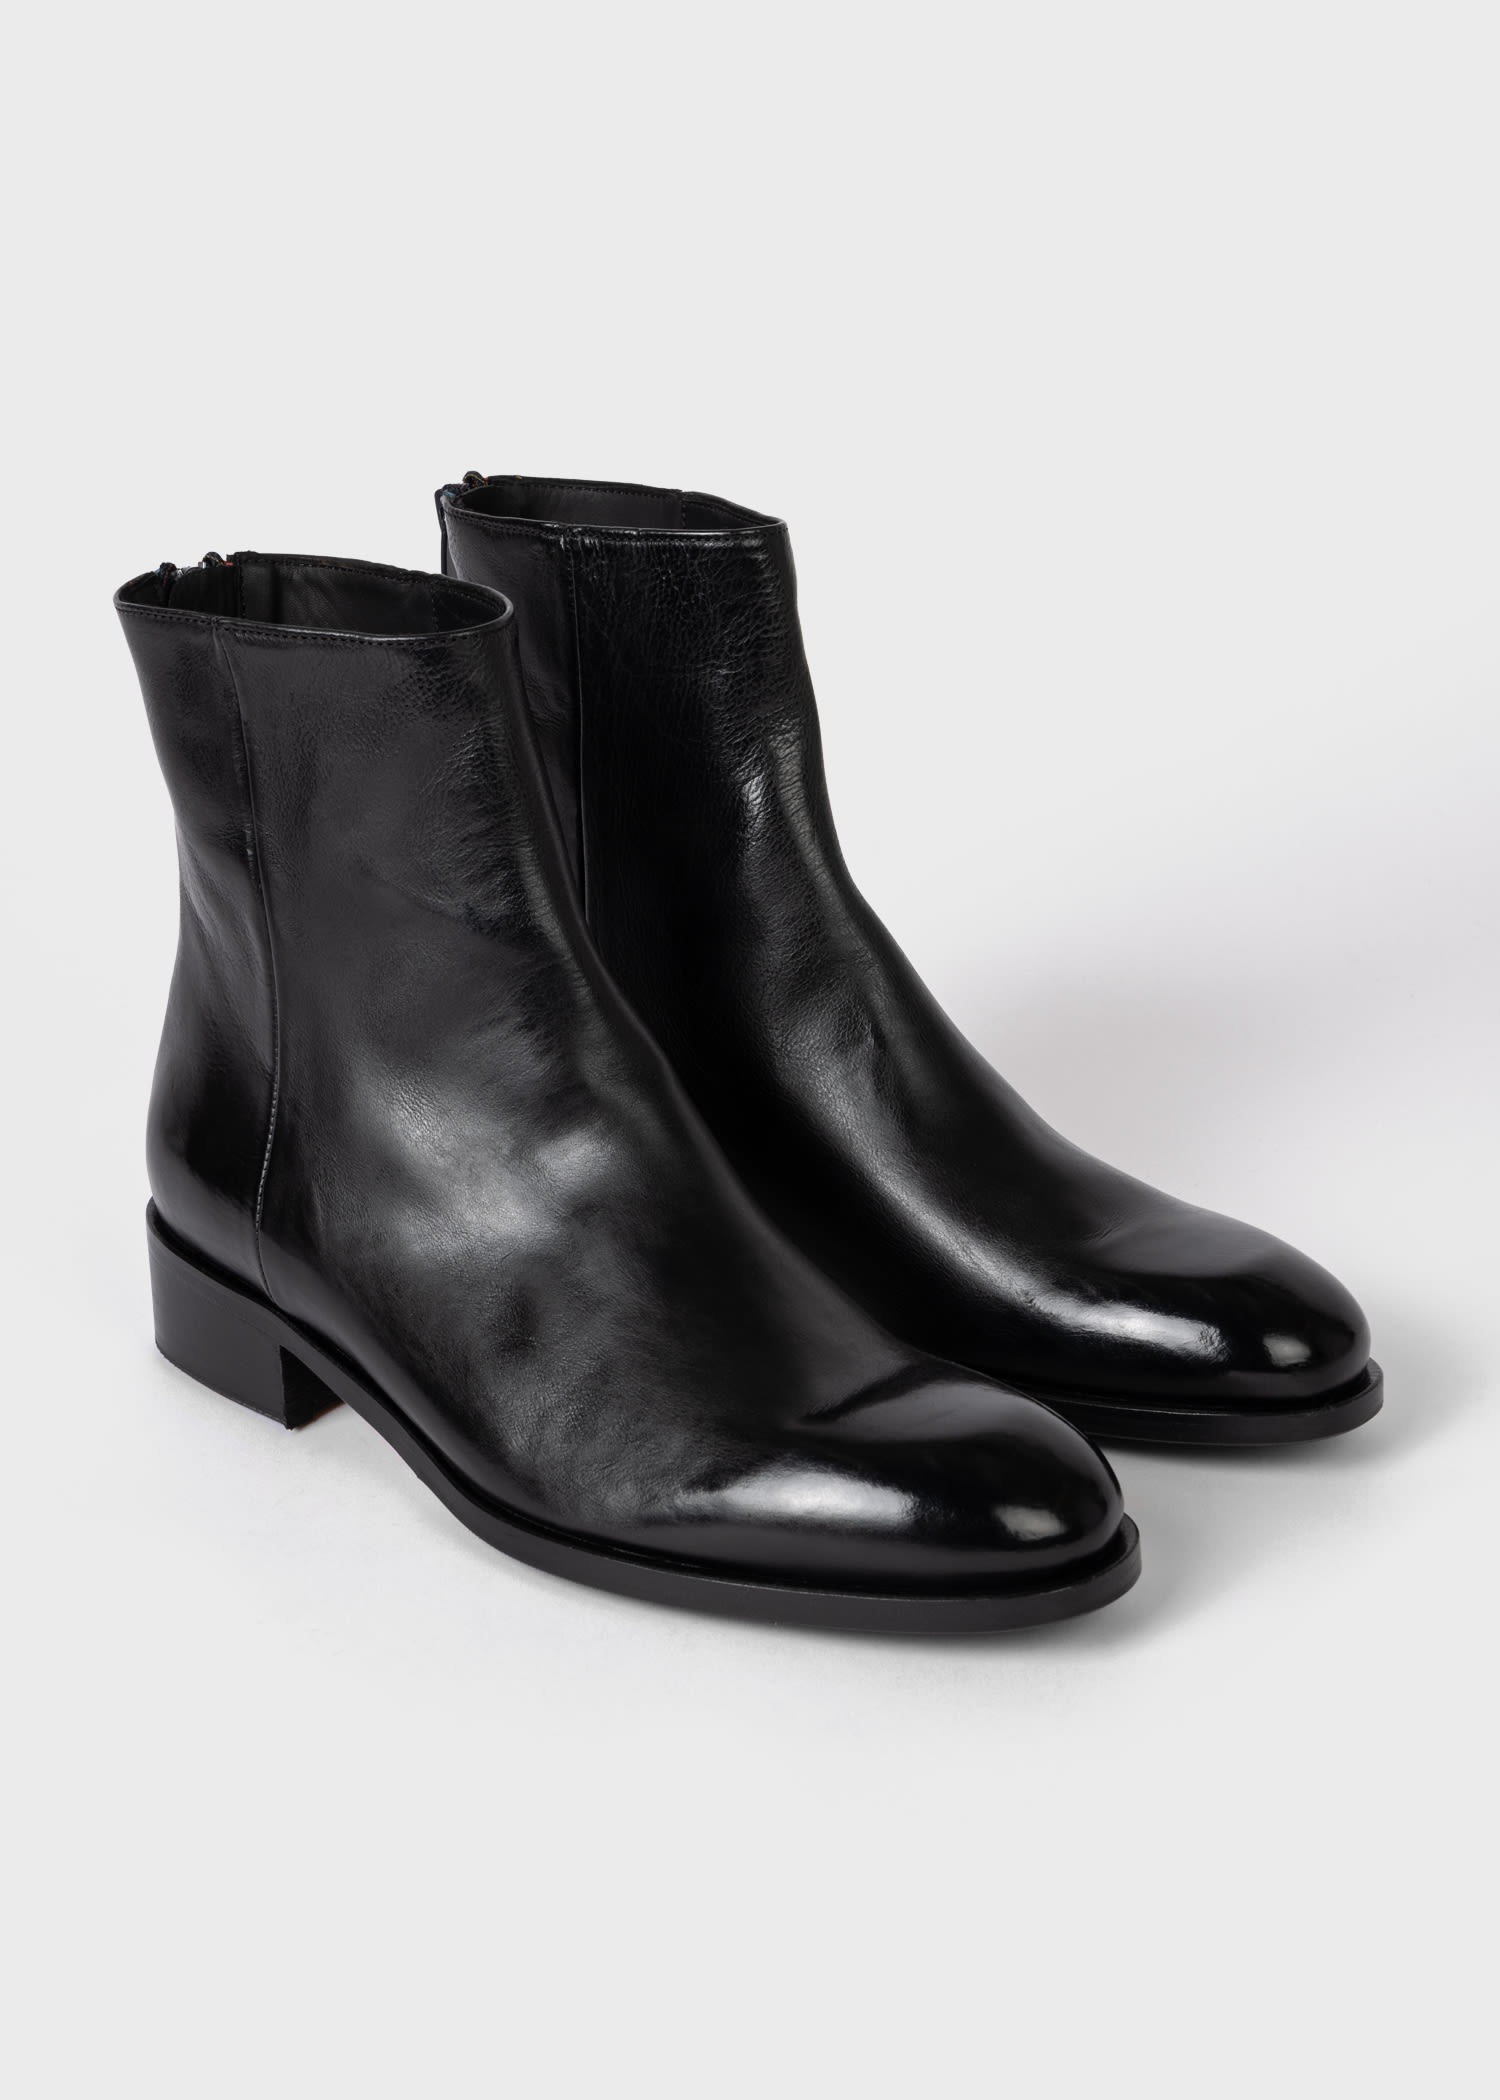 'Geno' Ankle Boots - 2